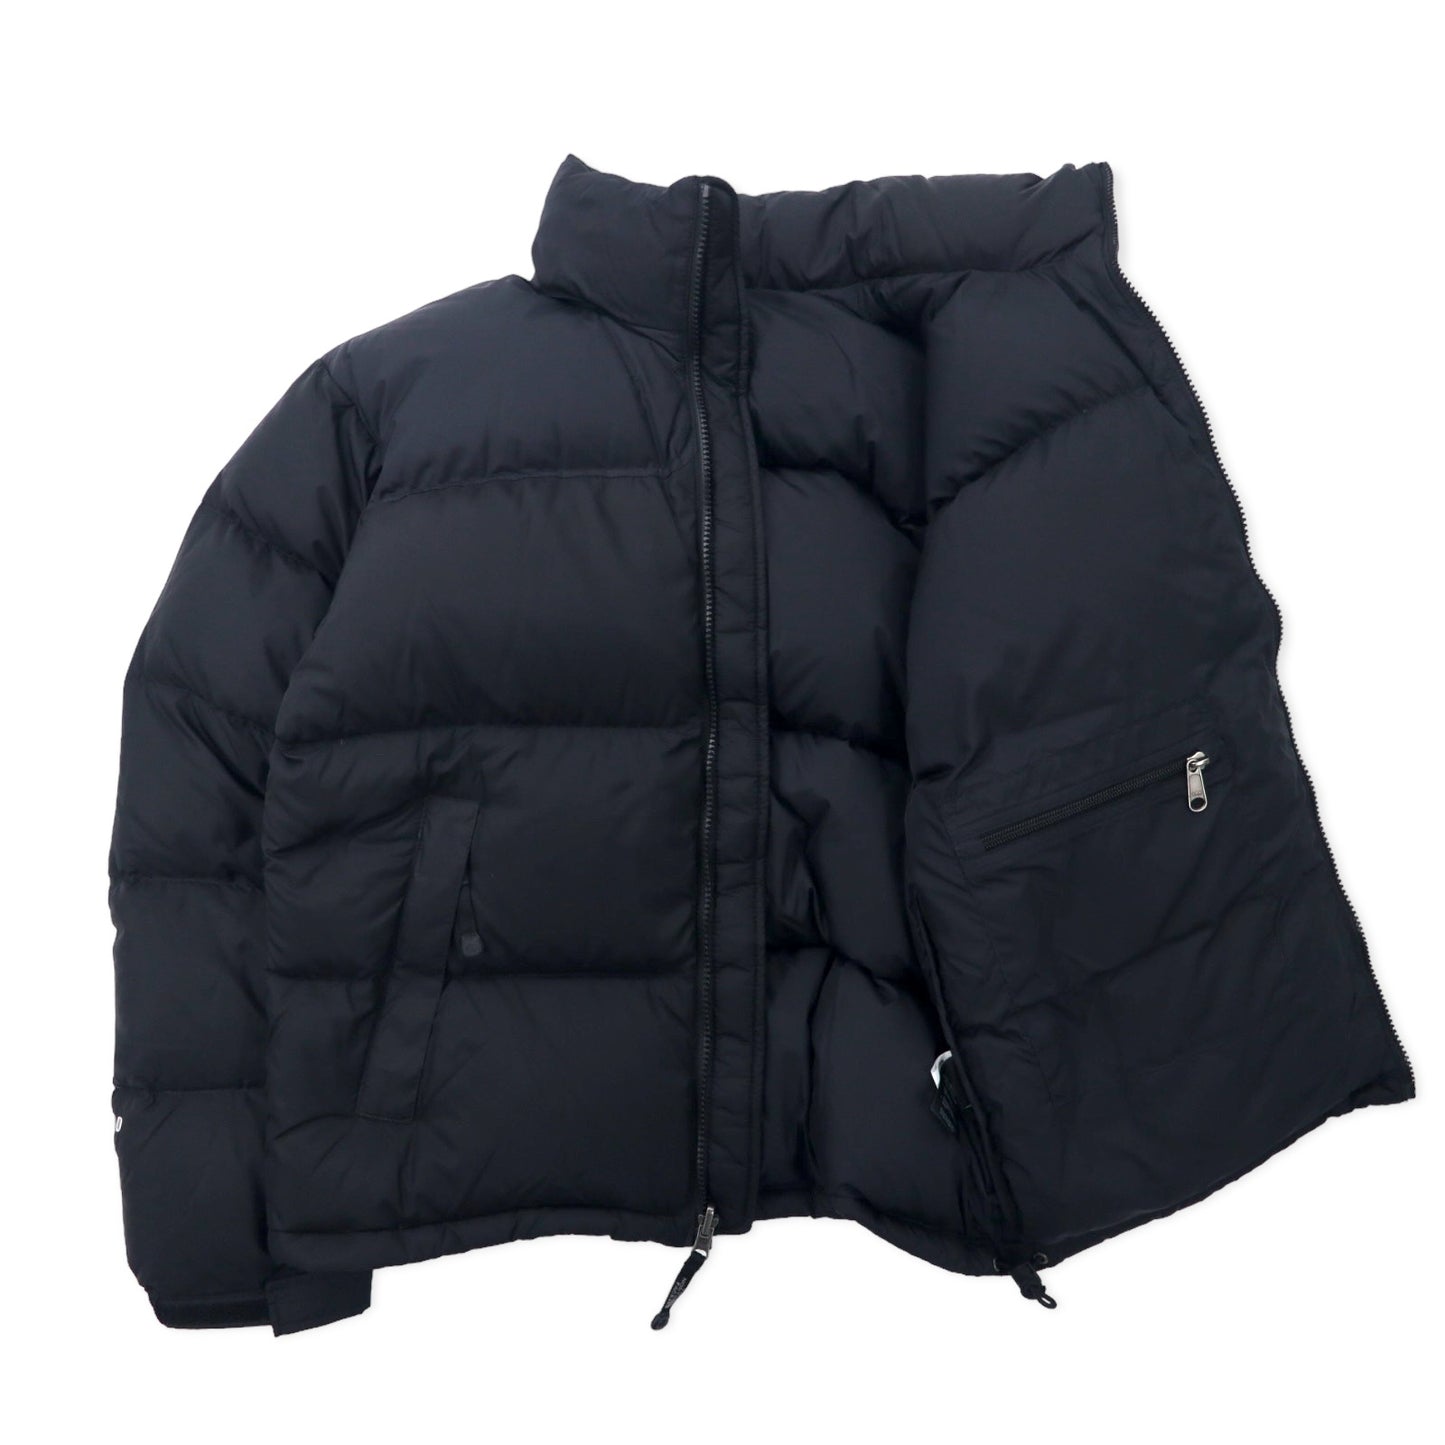 THE NORTH FACE Center logo embroidery Nupushi PUFFER JACKET 700 